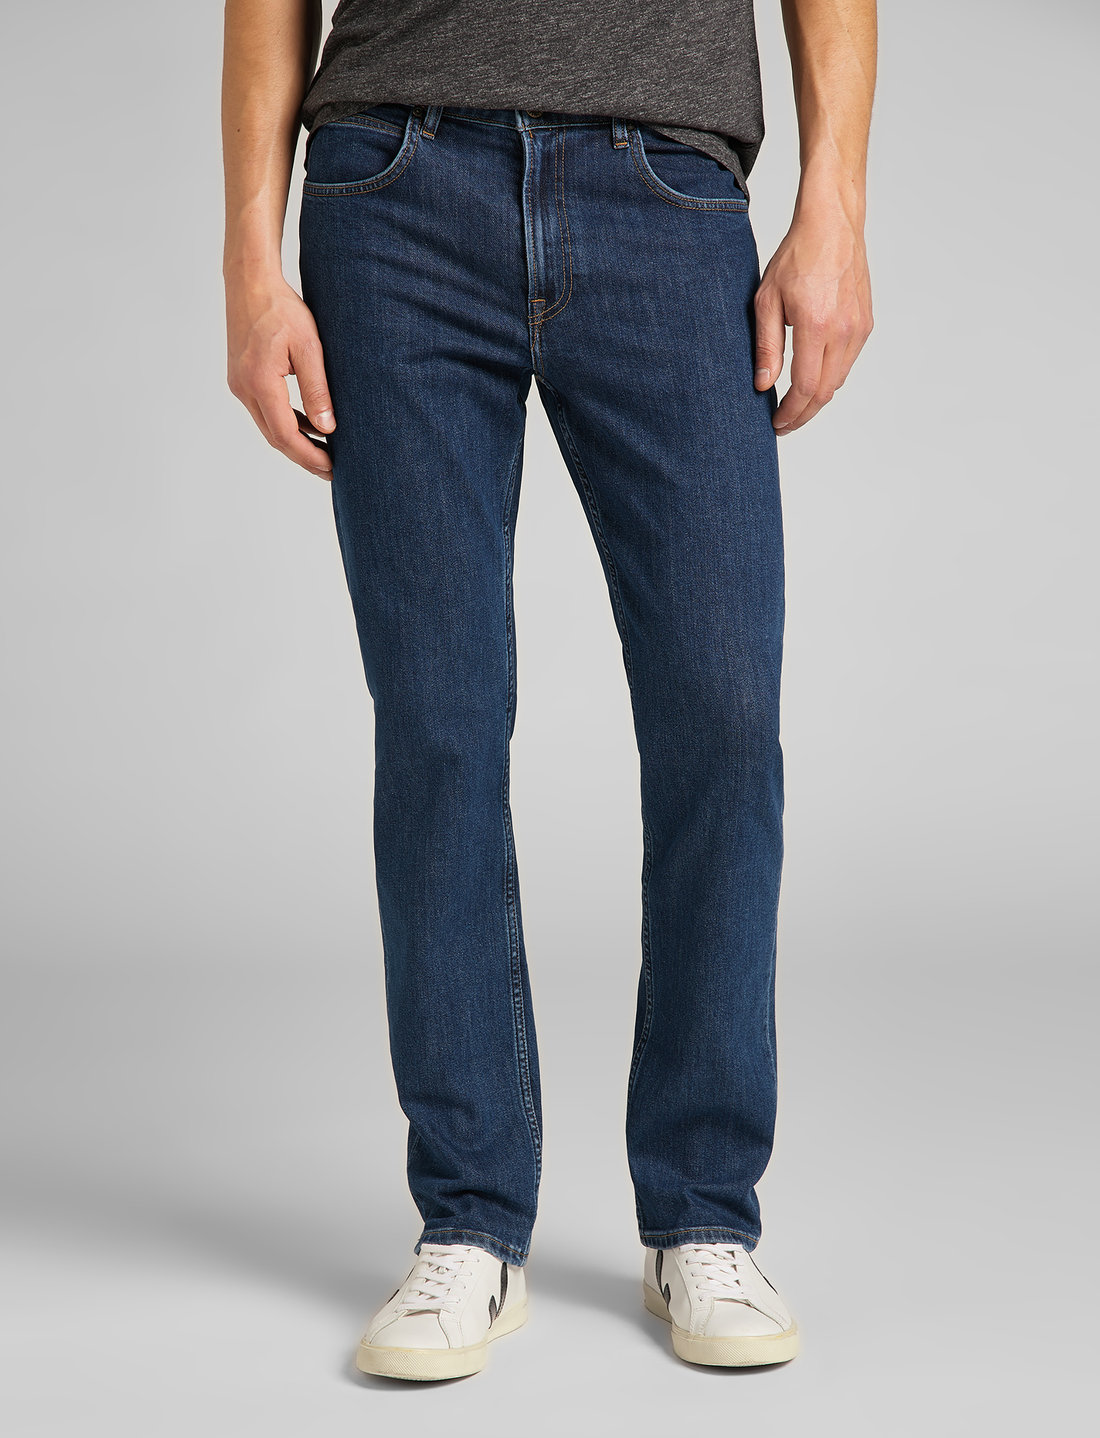 Lee Jeans Brooklyn Straight – jeans – shop at Booztlet